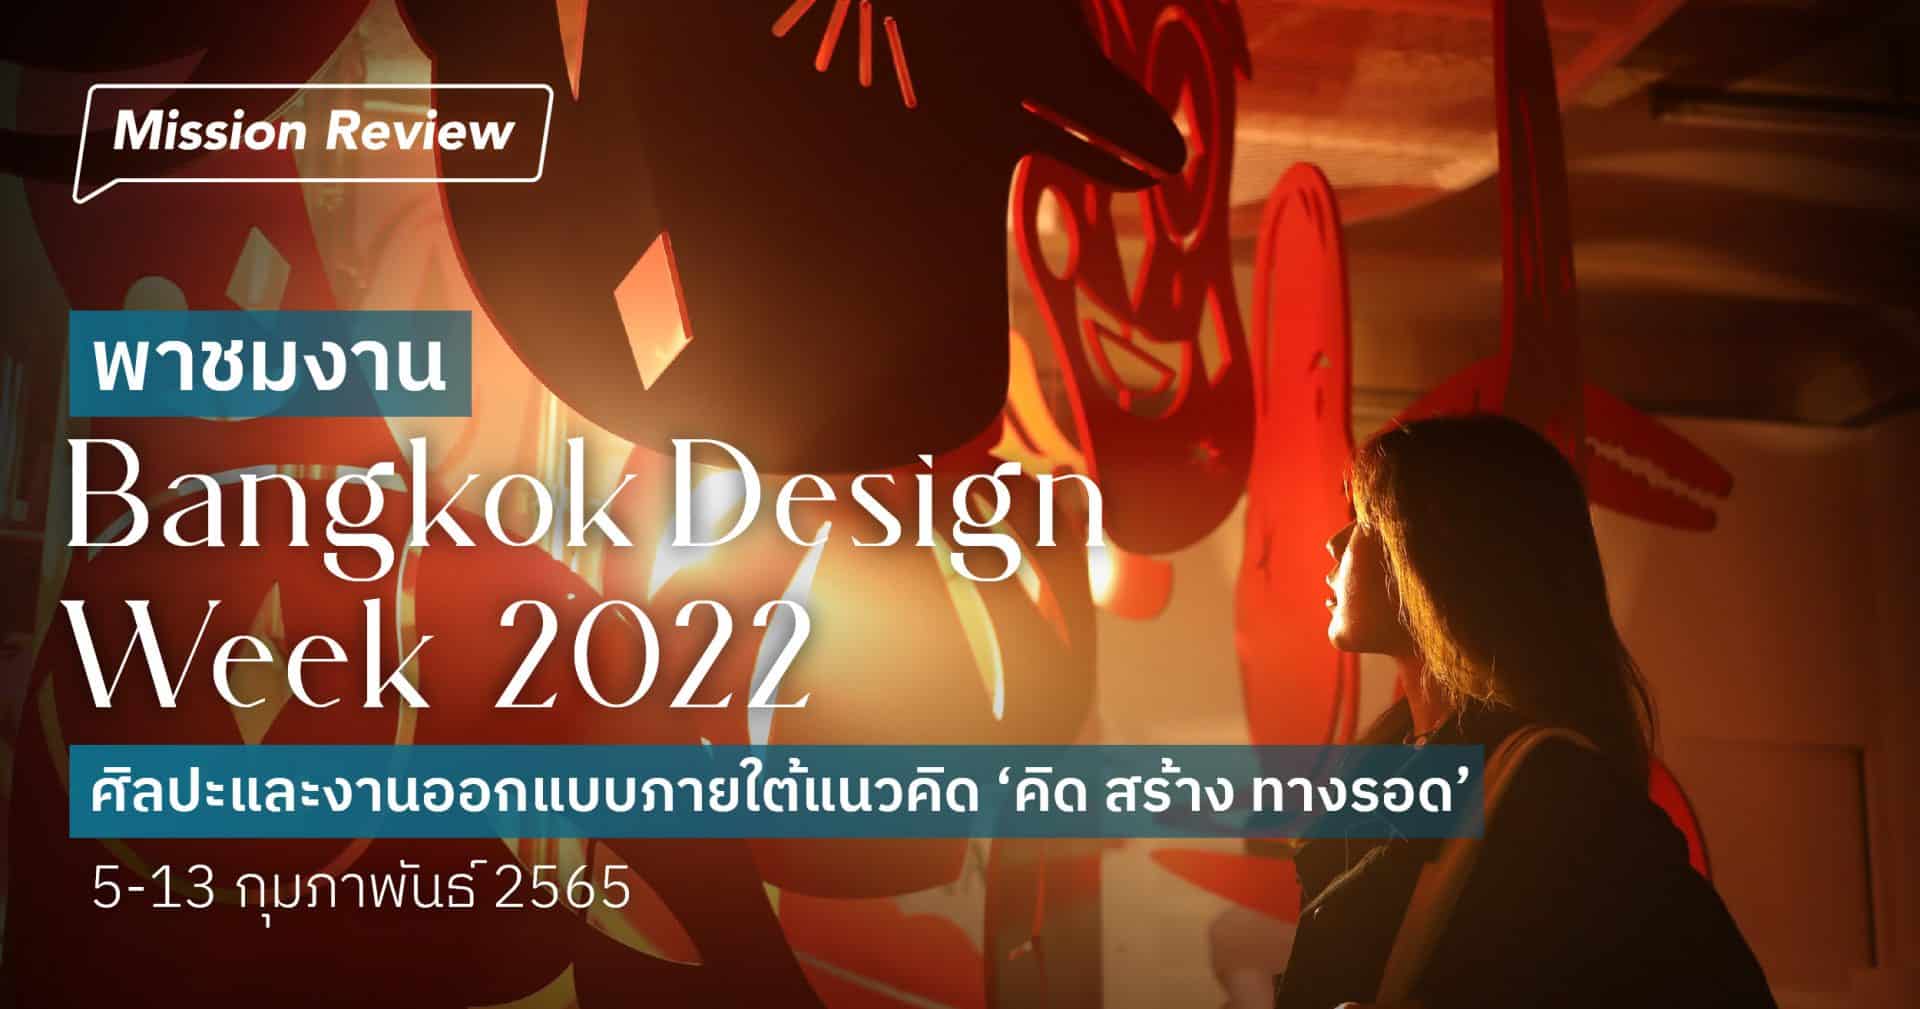 Bangkok Design Week 2022 by Mission to the moon